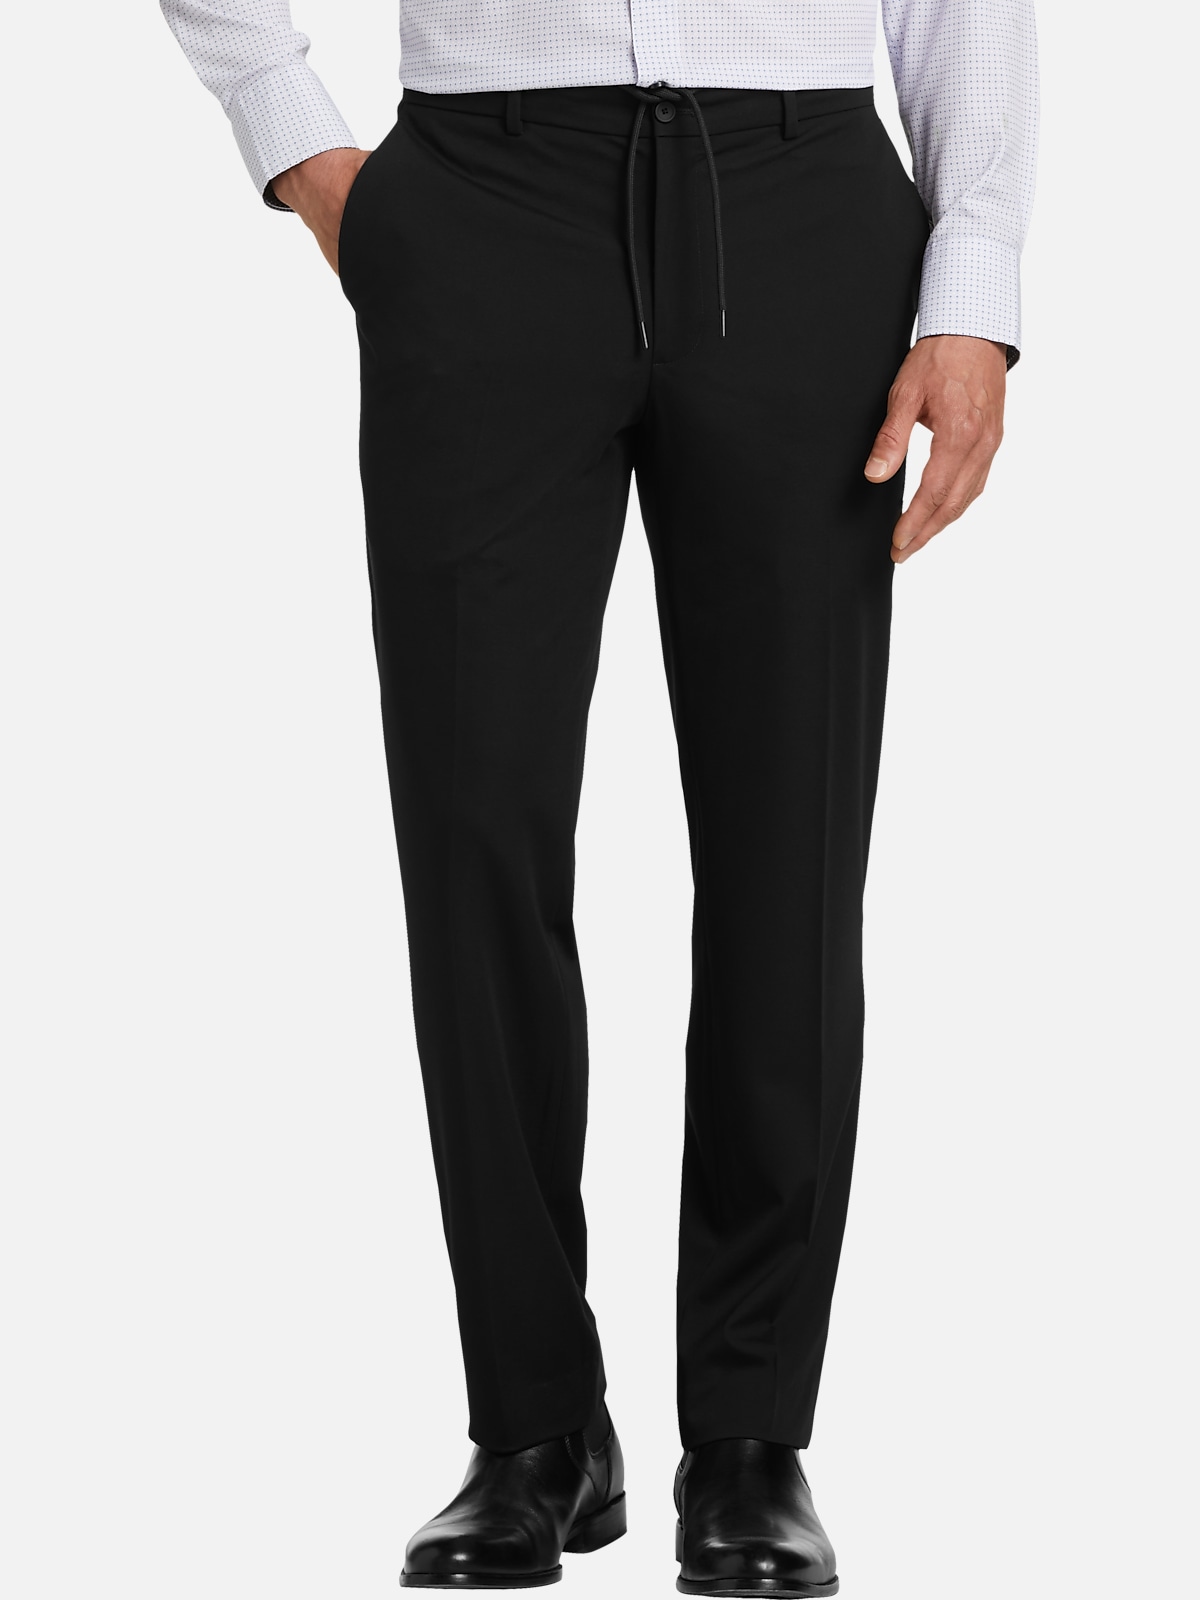 Awearness Kenneth Cole Knit Slim Fit Suit Separates Solid Pants | Pants ...